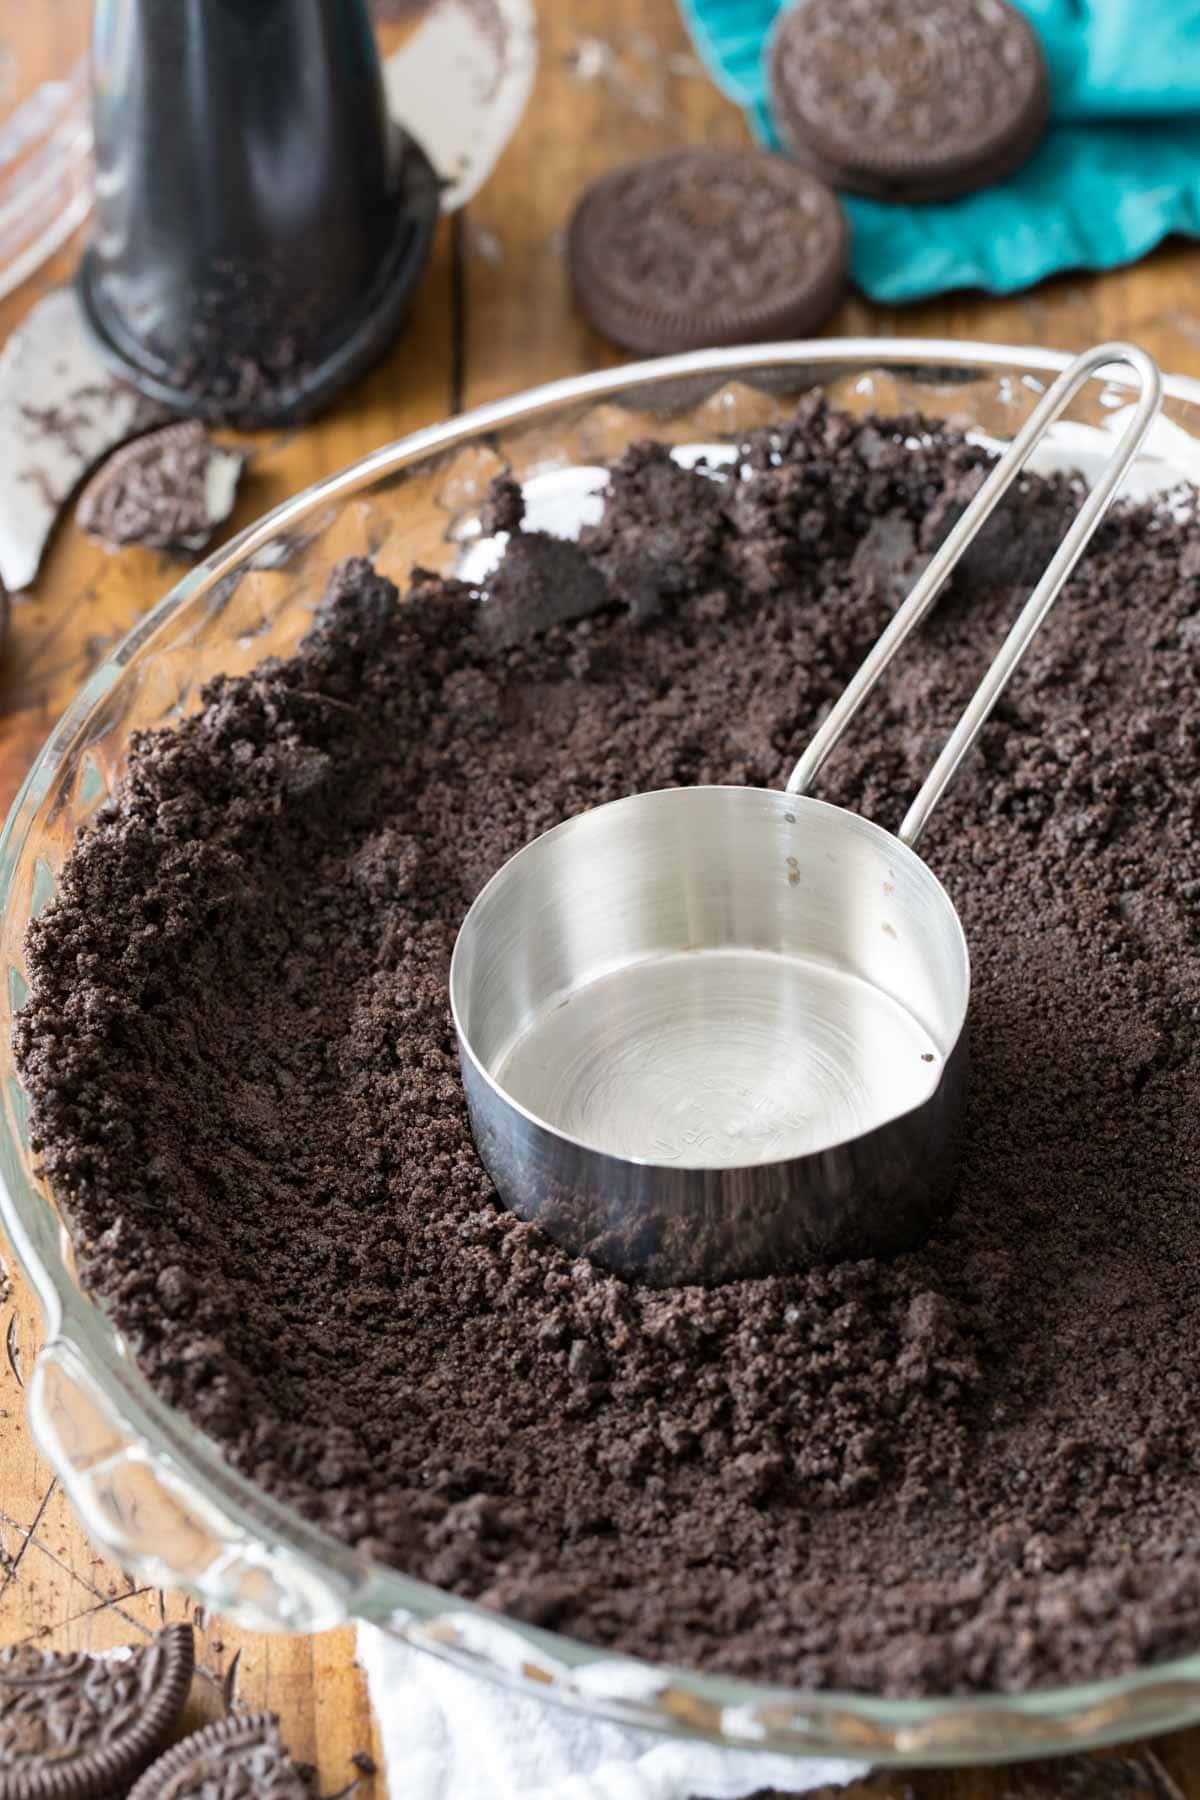 Metal measuring cup tamping down Oreo crumbs into a pie plate to form a crust.